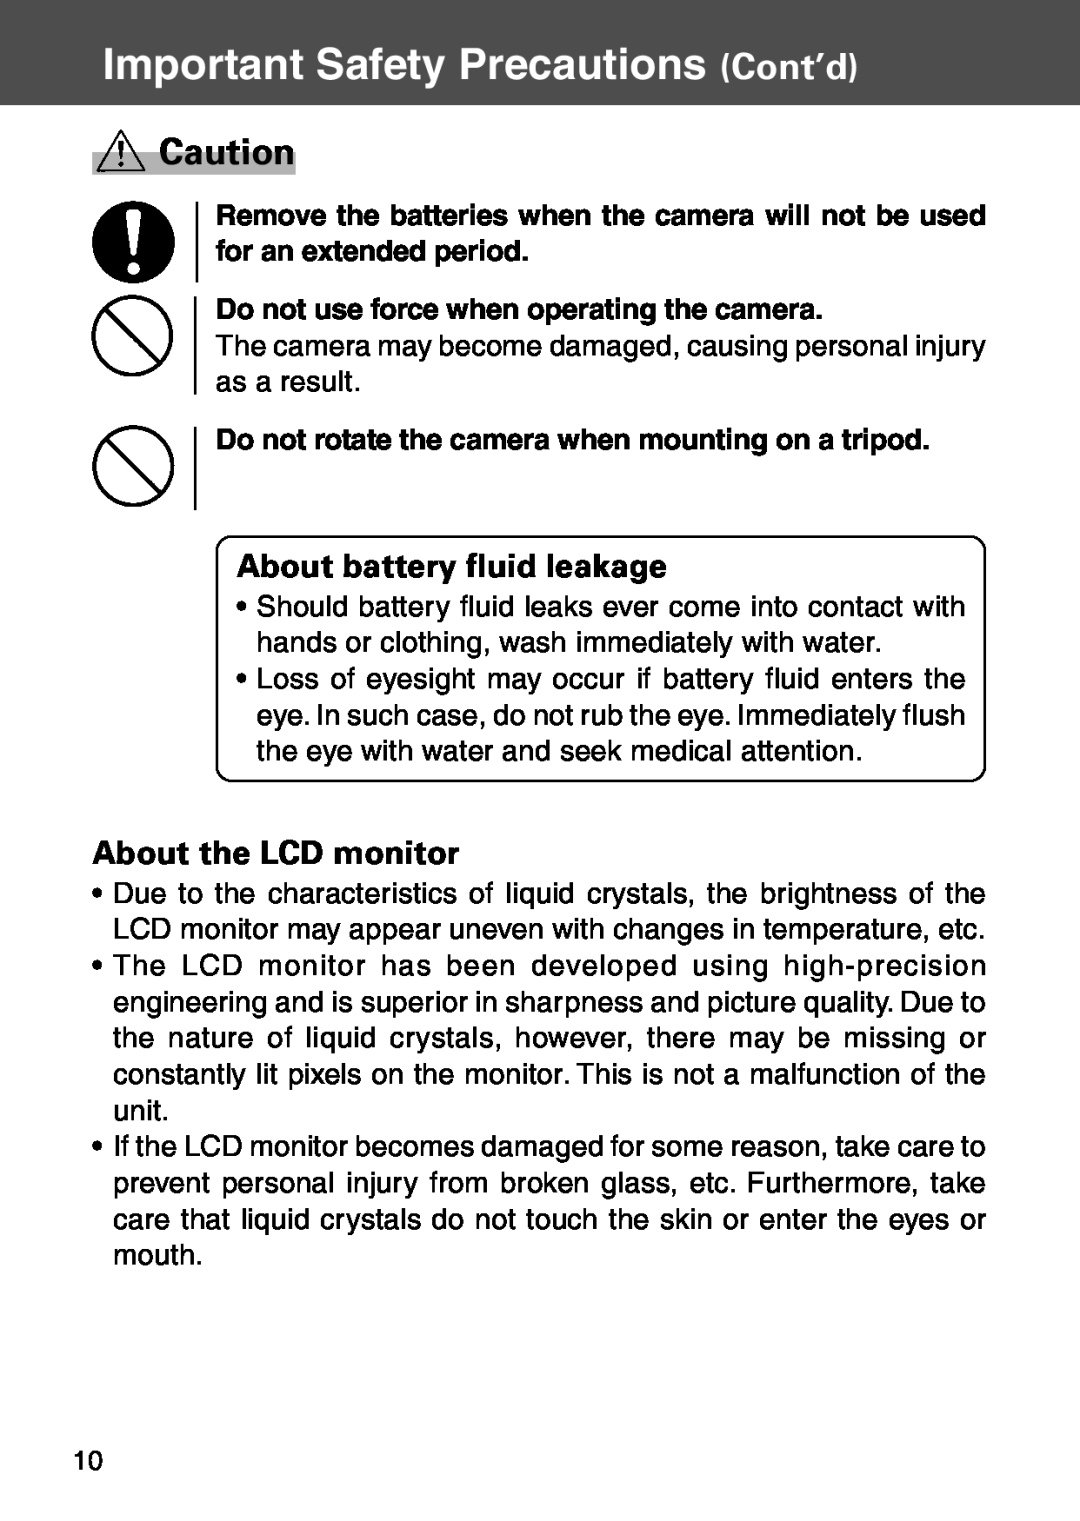 Konica Minolta KD-500Z About battery fluid leakage, About the LCD monitor, Do not use force when operating the camera 